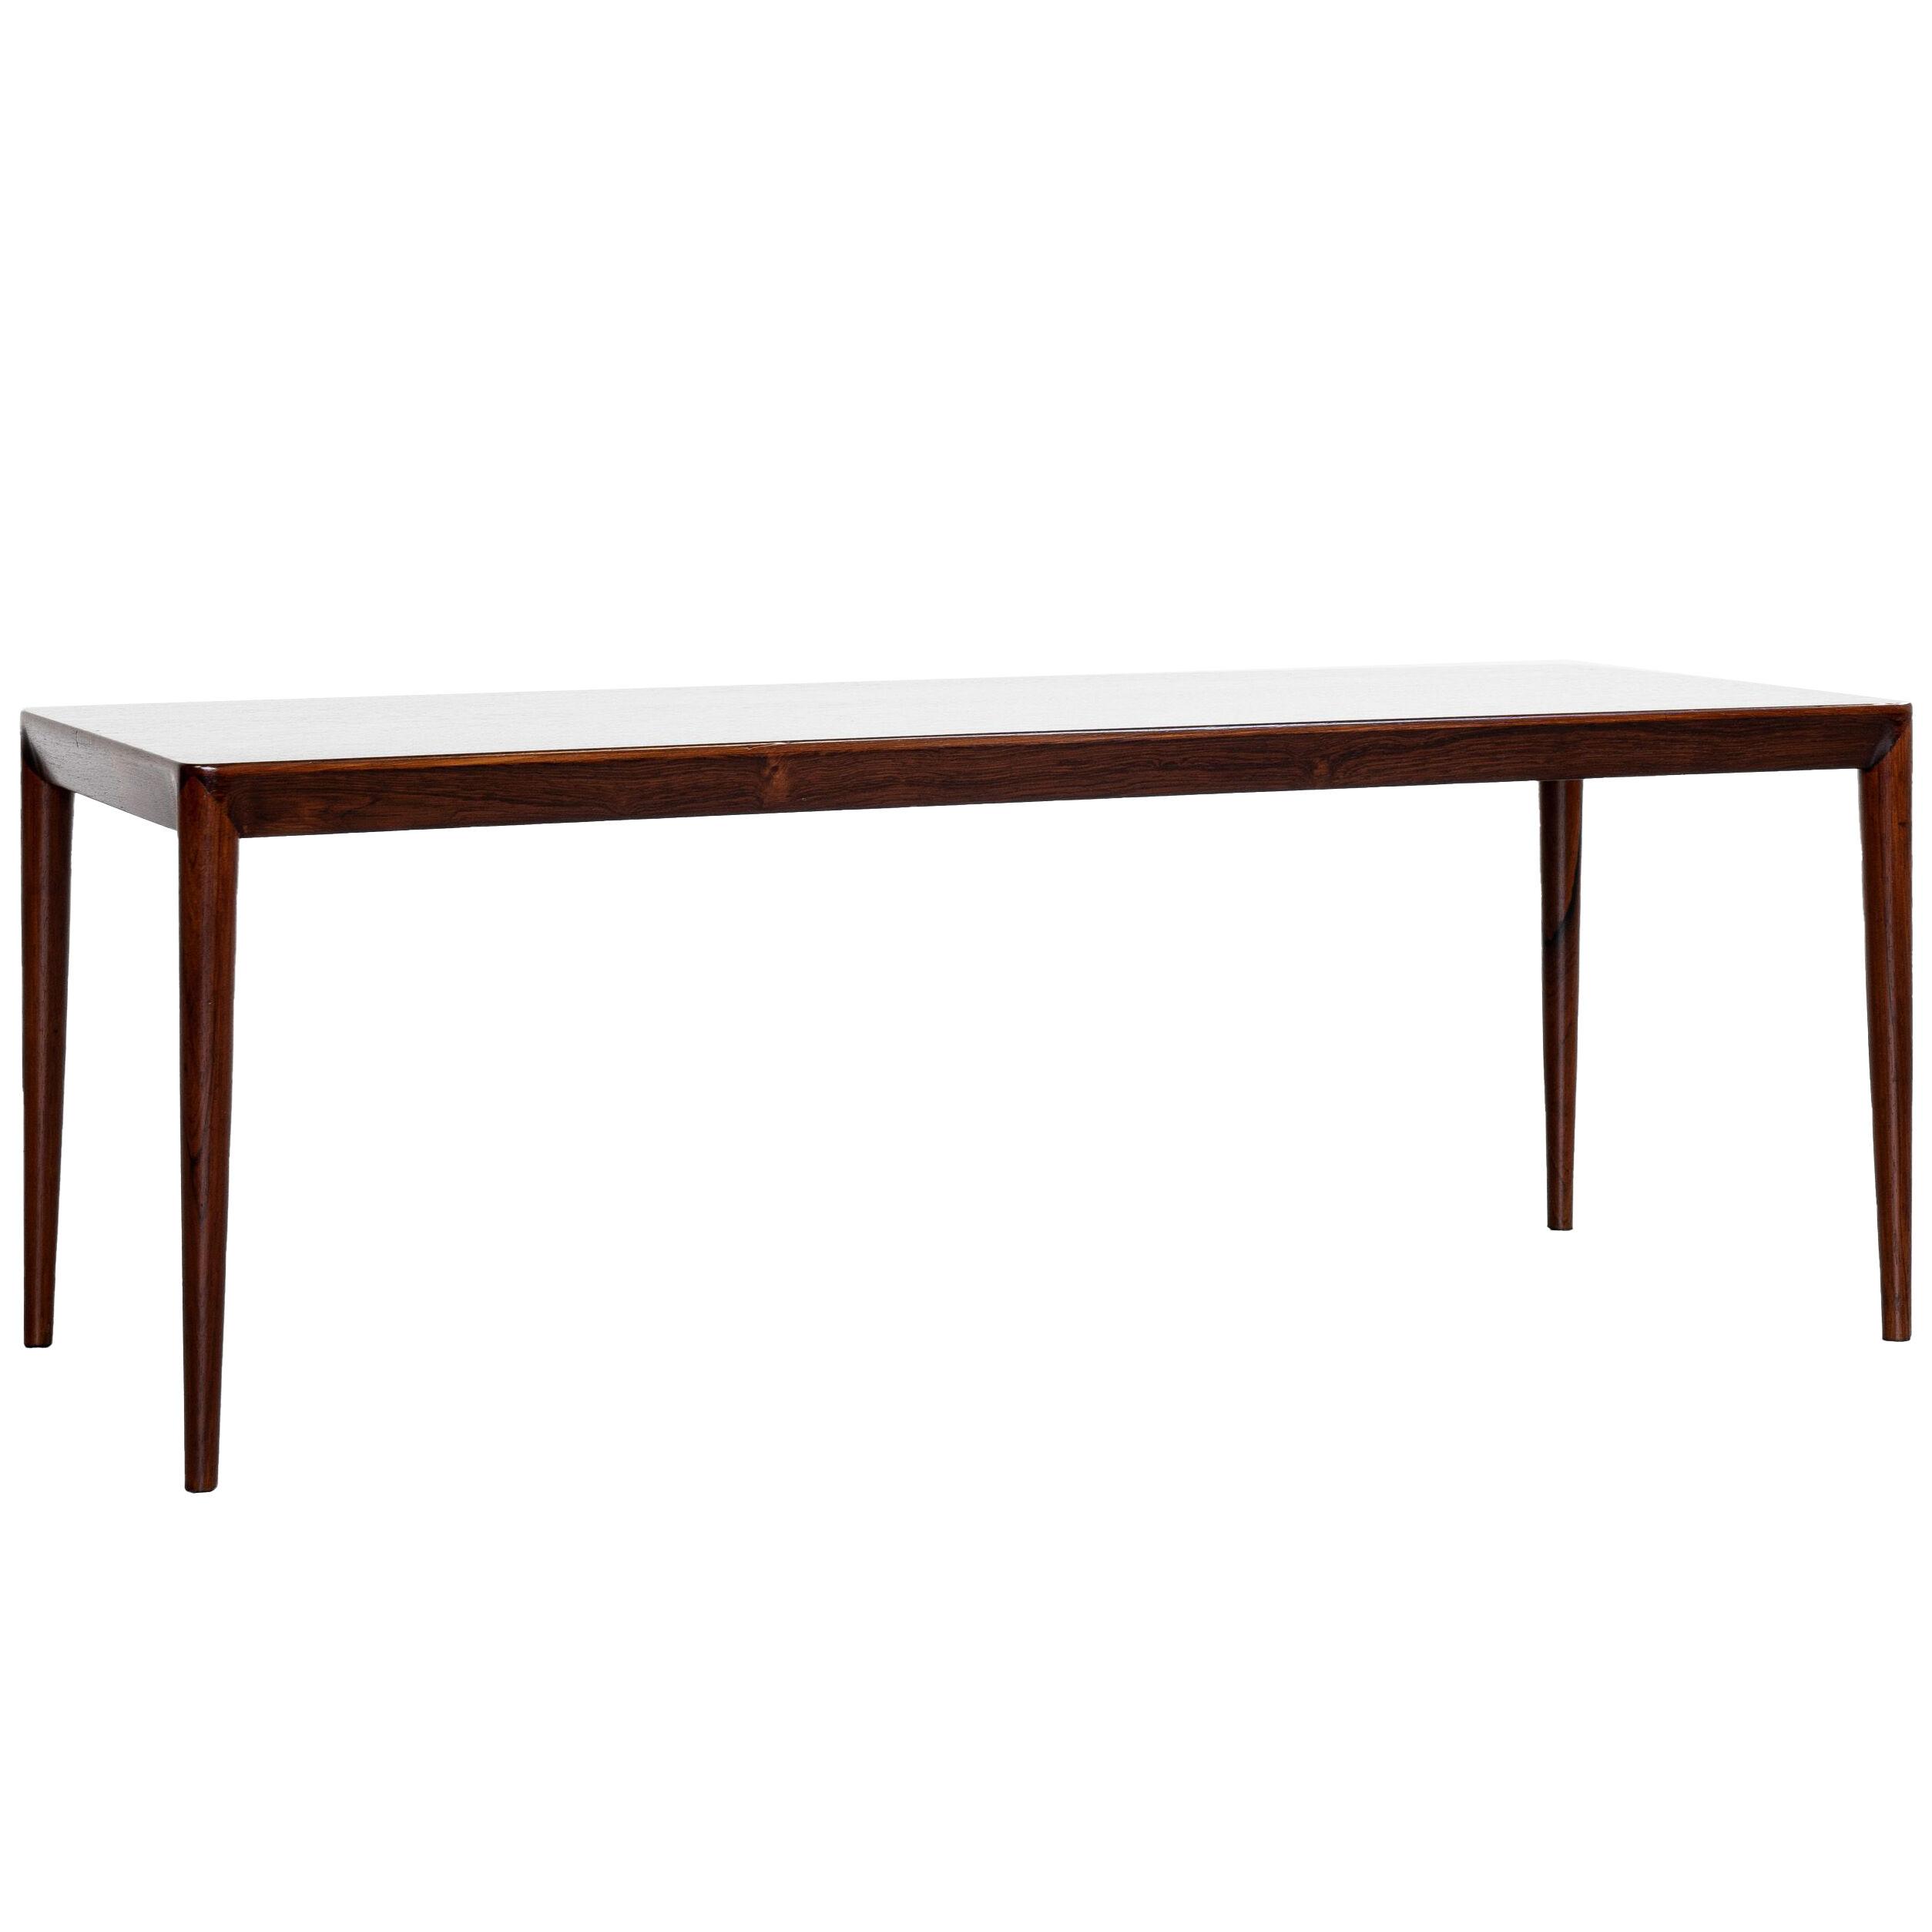 Midcentury Danish coffee table in rosewood by Erik Riisager Hansen for Haslev